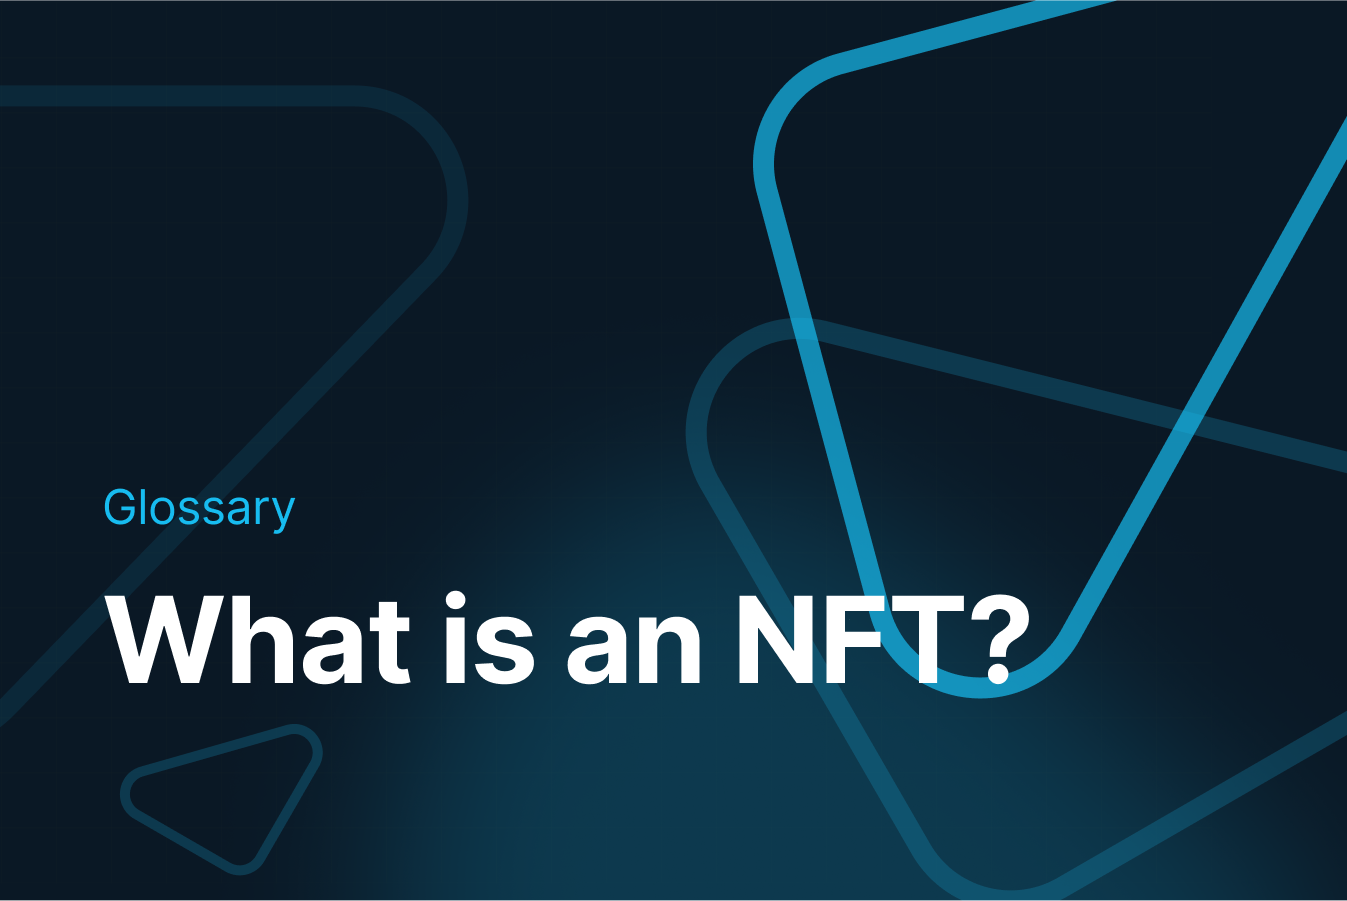 What is an NFT and how does it work?